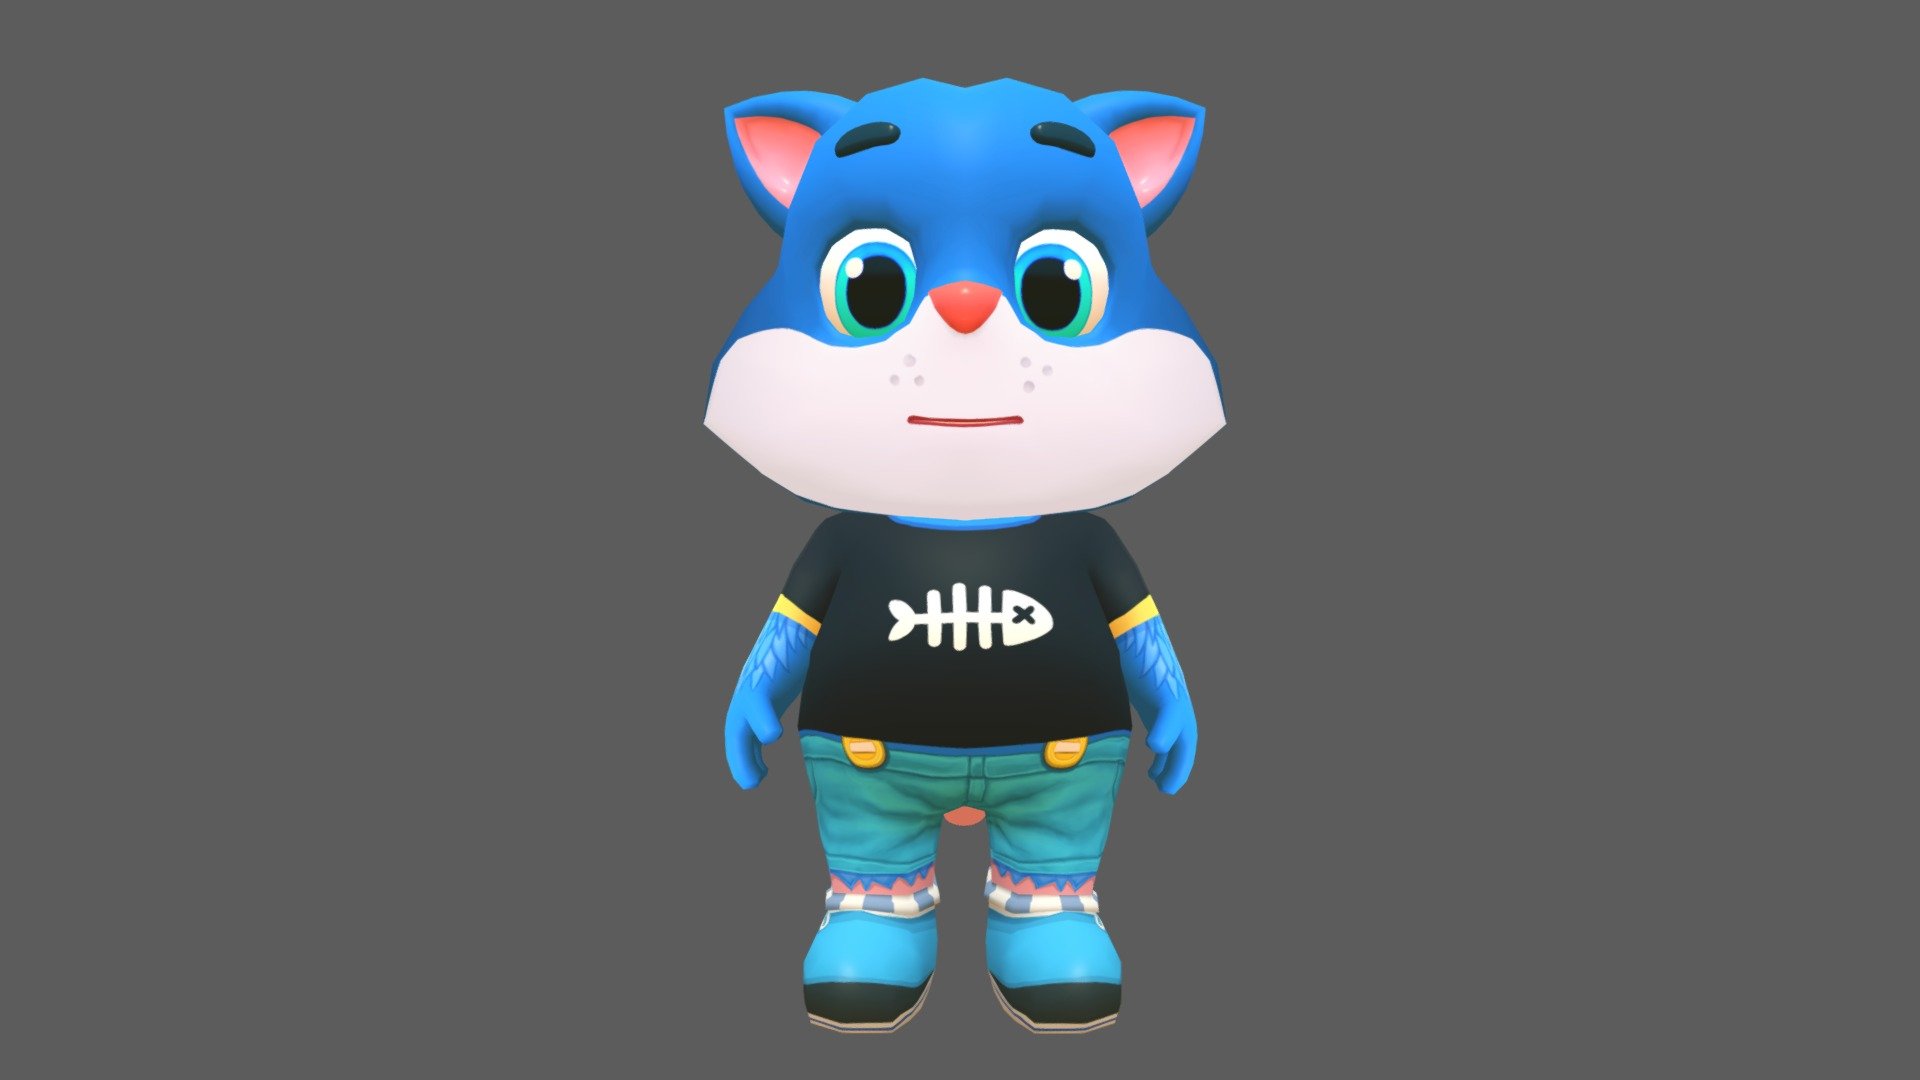 Cat Kitten character for games and animations. The model is game ready and compatible with game engines.

The model is low poly with four texture resolutions 4096x4096, 2048x2048, 1024x1024 &amp; 512x512.

Included Files:




Maya (.ma, .mb) - 2015 - 2019

FBX - 2014 - 2019

OBJ

The package includes 18 Animations which are as follows:




Run

Idle

Jump

Leap left

Leap right

Skidding

Roll

Crash &amp; Death

Power up

Whirl

Whirl jump

Waving in air

Backwards run

Dizzy

Gum Bubble

Gliding

Waving

Looking behind

The model is fully rigged and can be easily animated in case further animating or modification is required.

The model is game ready at:




3632 Polygons

3620 Vertices

The model is UV mapped with non-overlapping UV's. The shadows and lights are baked in the texture, although you can add more lights and shadows for rendering and use it as you please 3d model